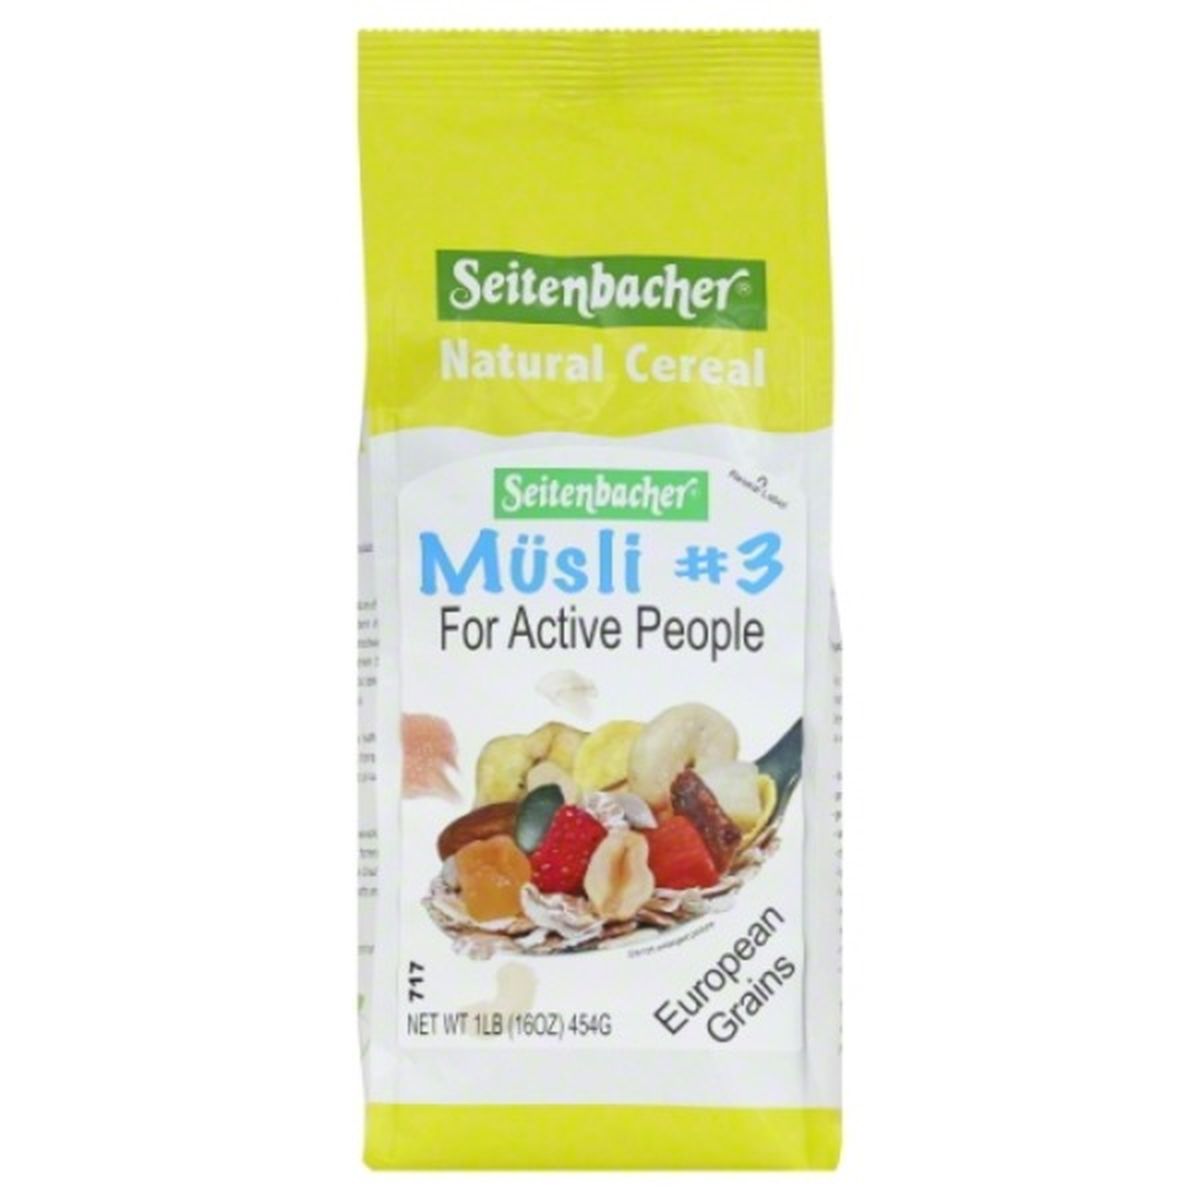 Calories in Seitenbacher Cereal, Natural, Musli No. 3, for Active People